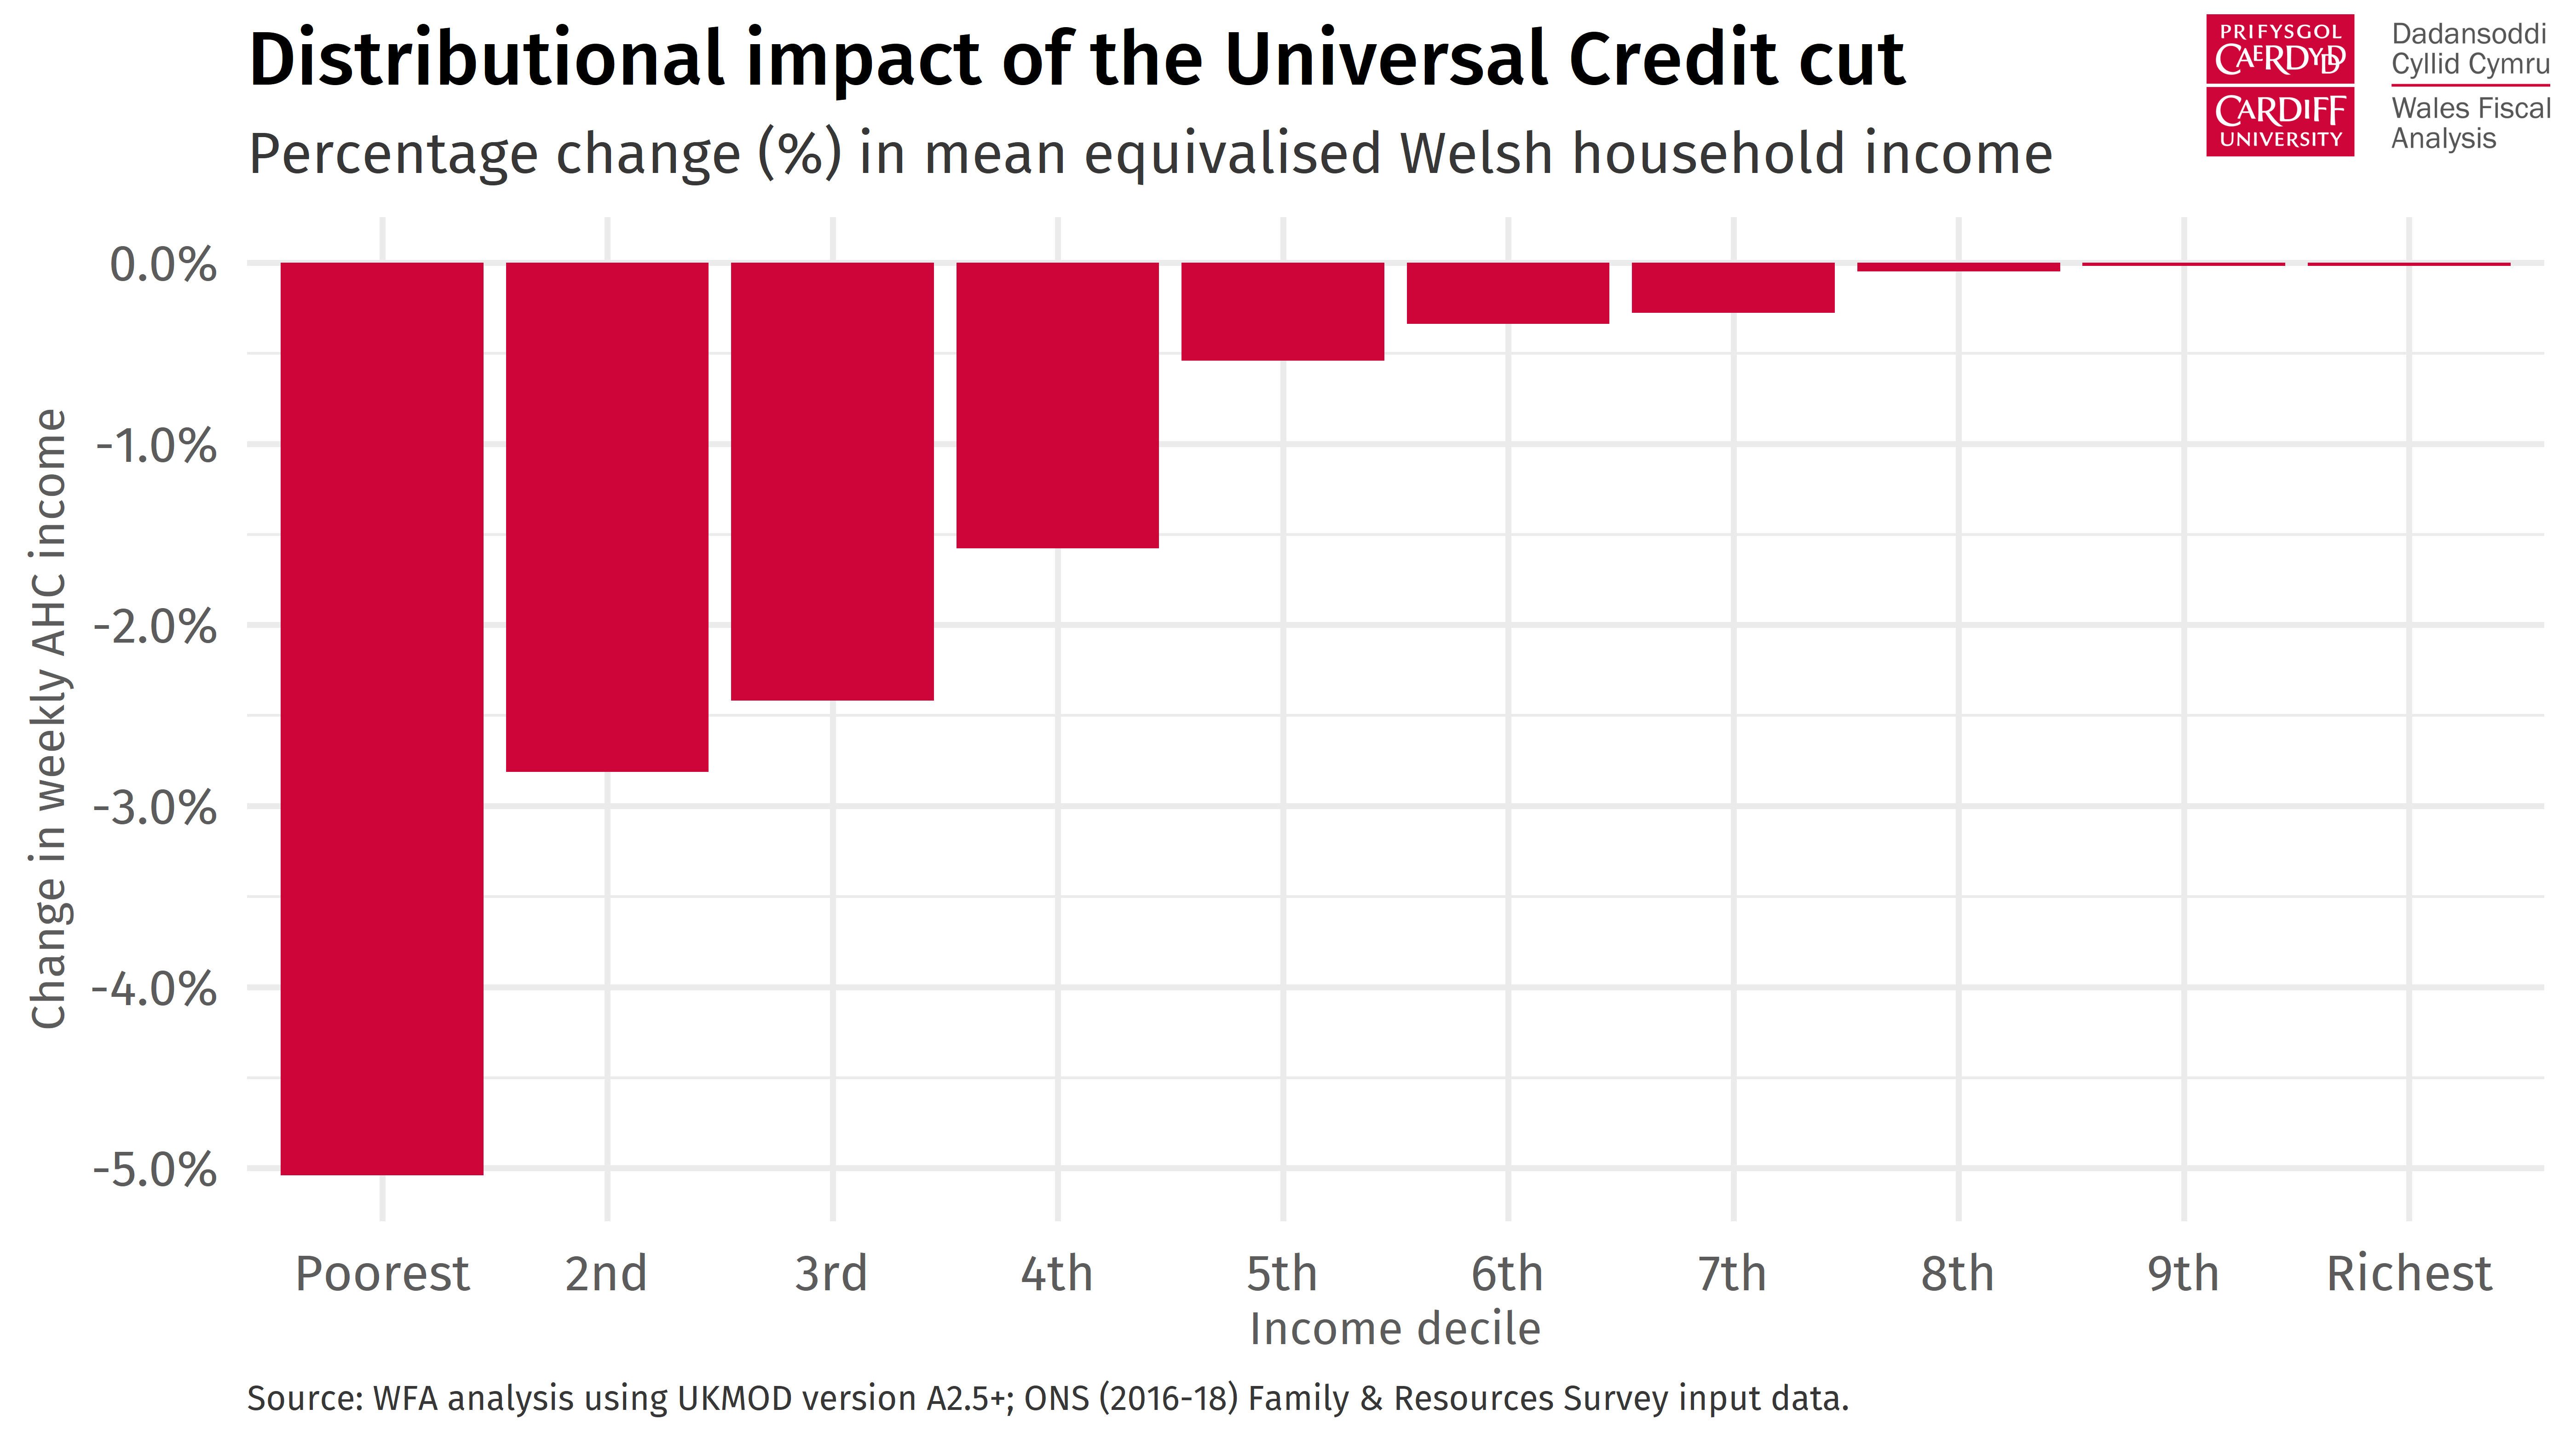 Bar chart showing the distributional impact of the Universal Credit cut by Welsh household income decile. Those in the poorest decile will lose out the most as a proportion of their income.